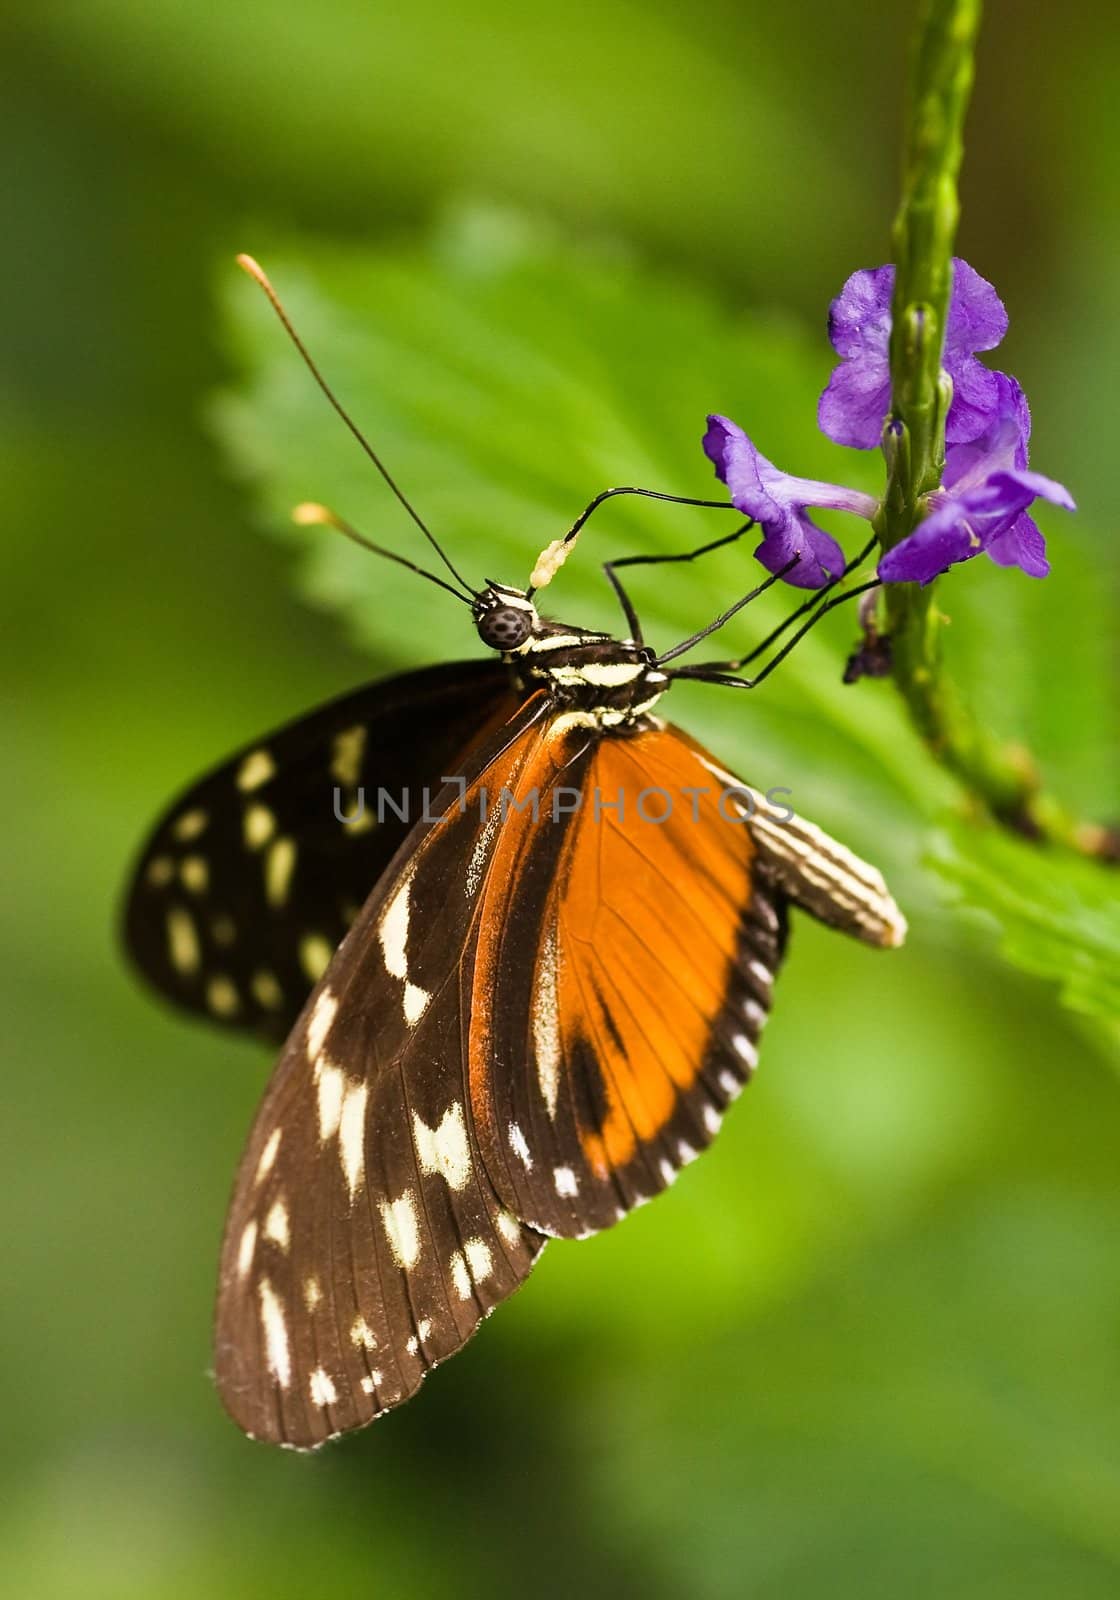 Butterfly-Heleconius charitonius by Colette